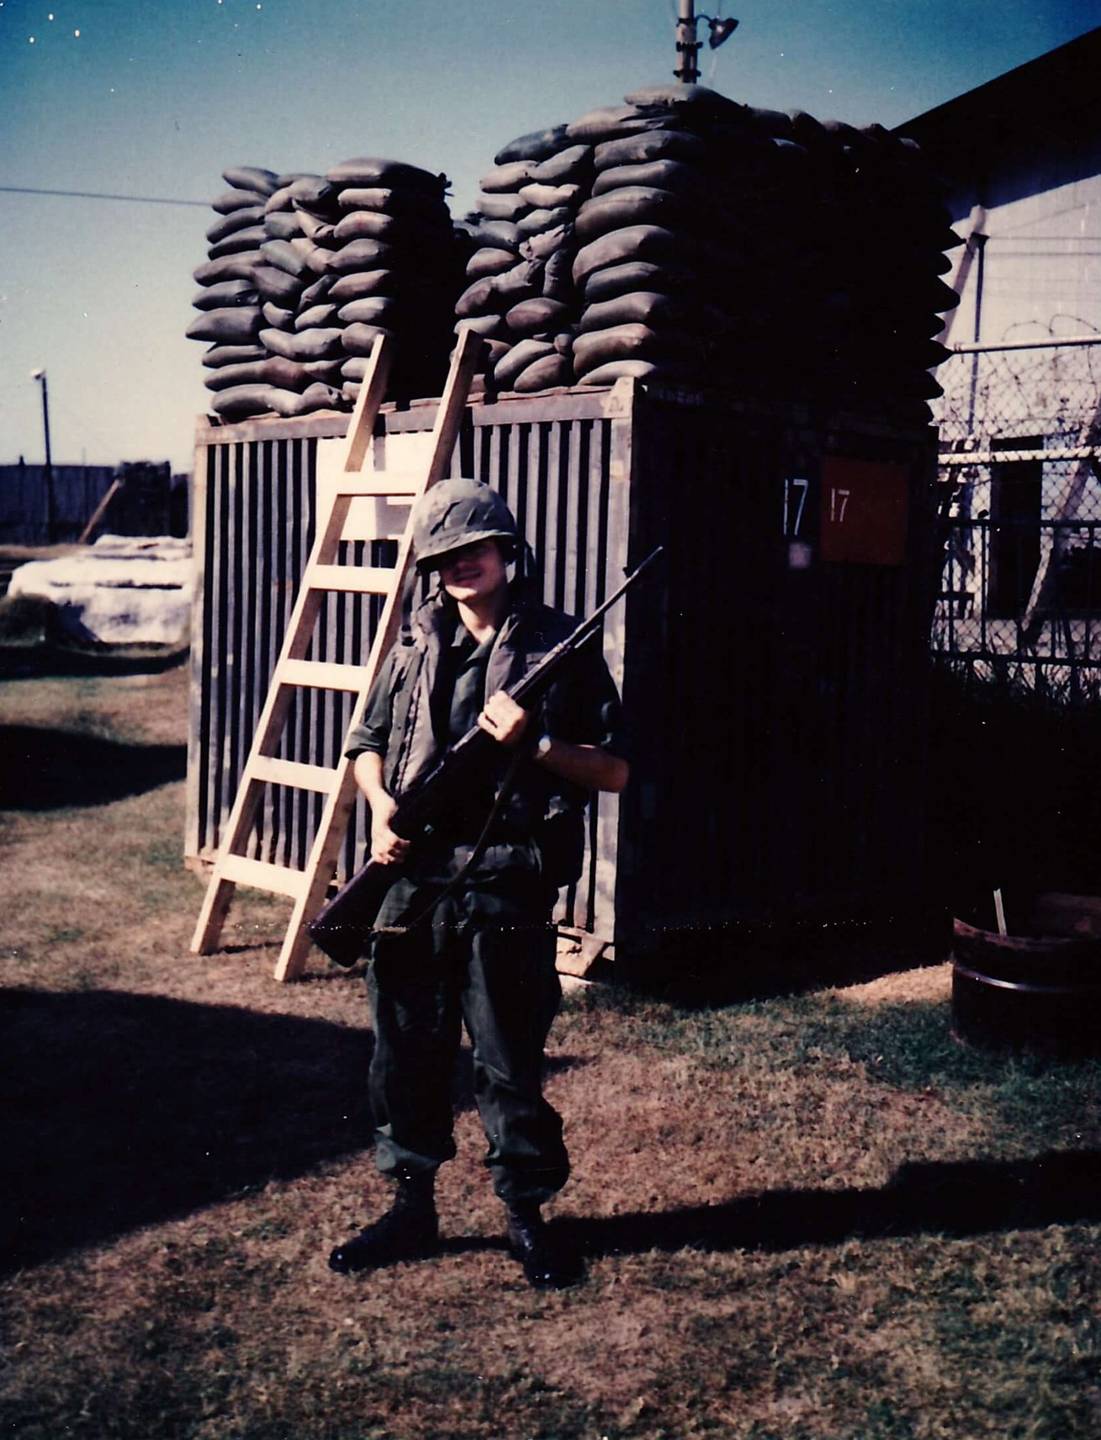 U.S. soldier in full gear, holding rifle, standing in front of a wooden structure with sandbags stacked on top of it.